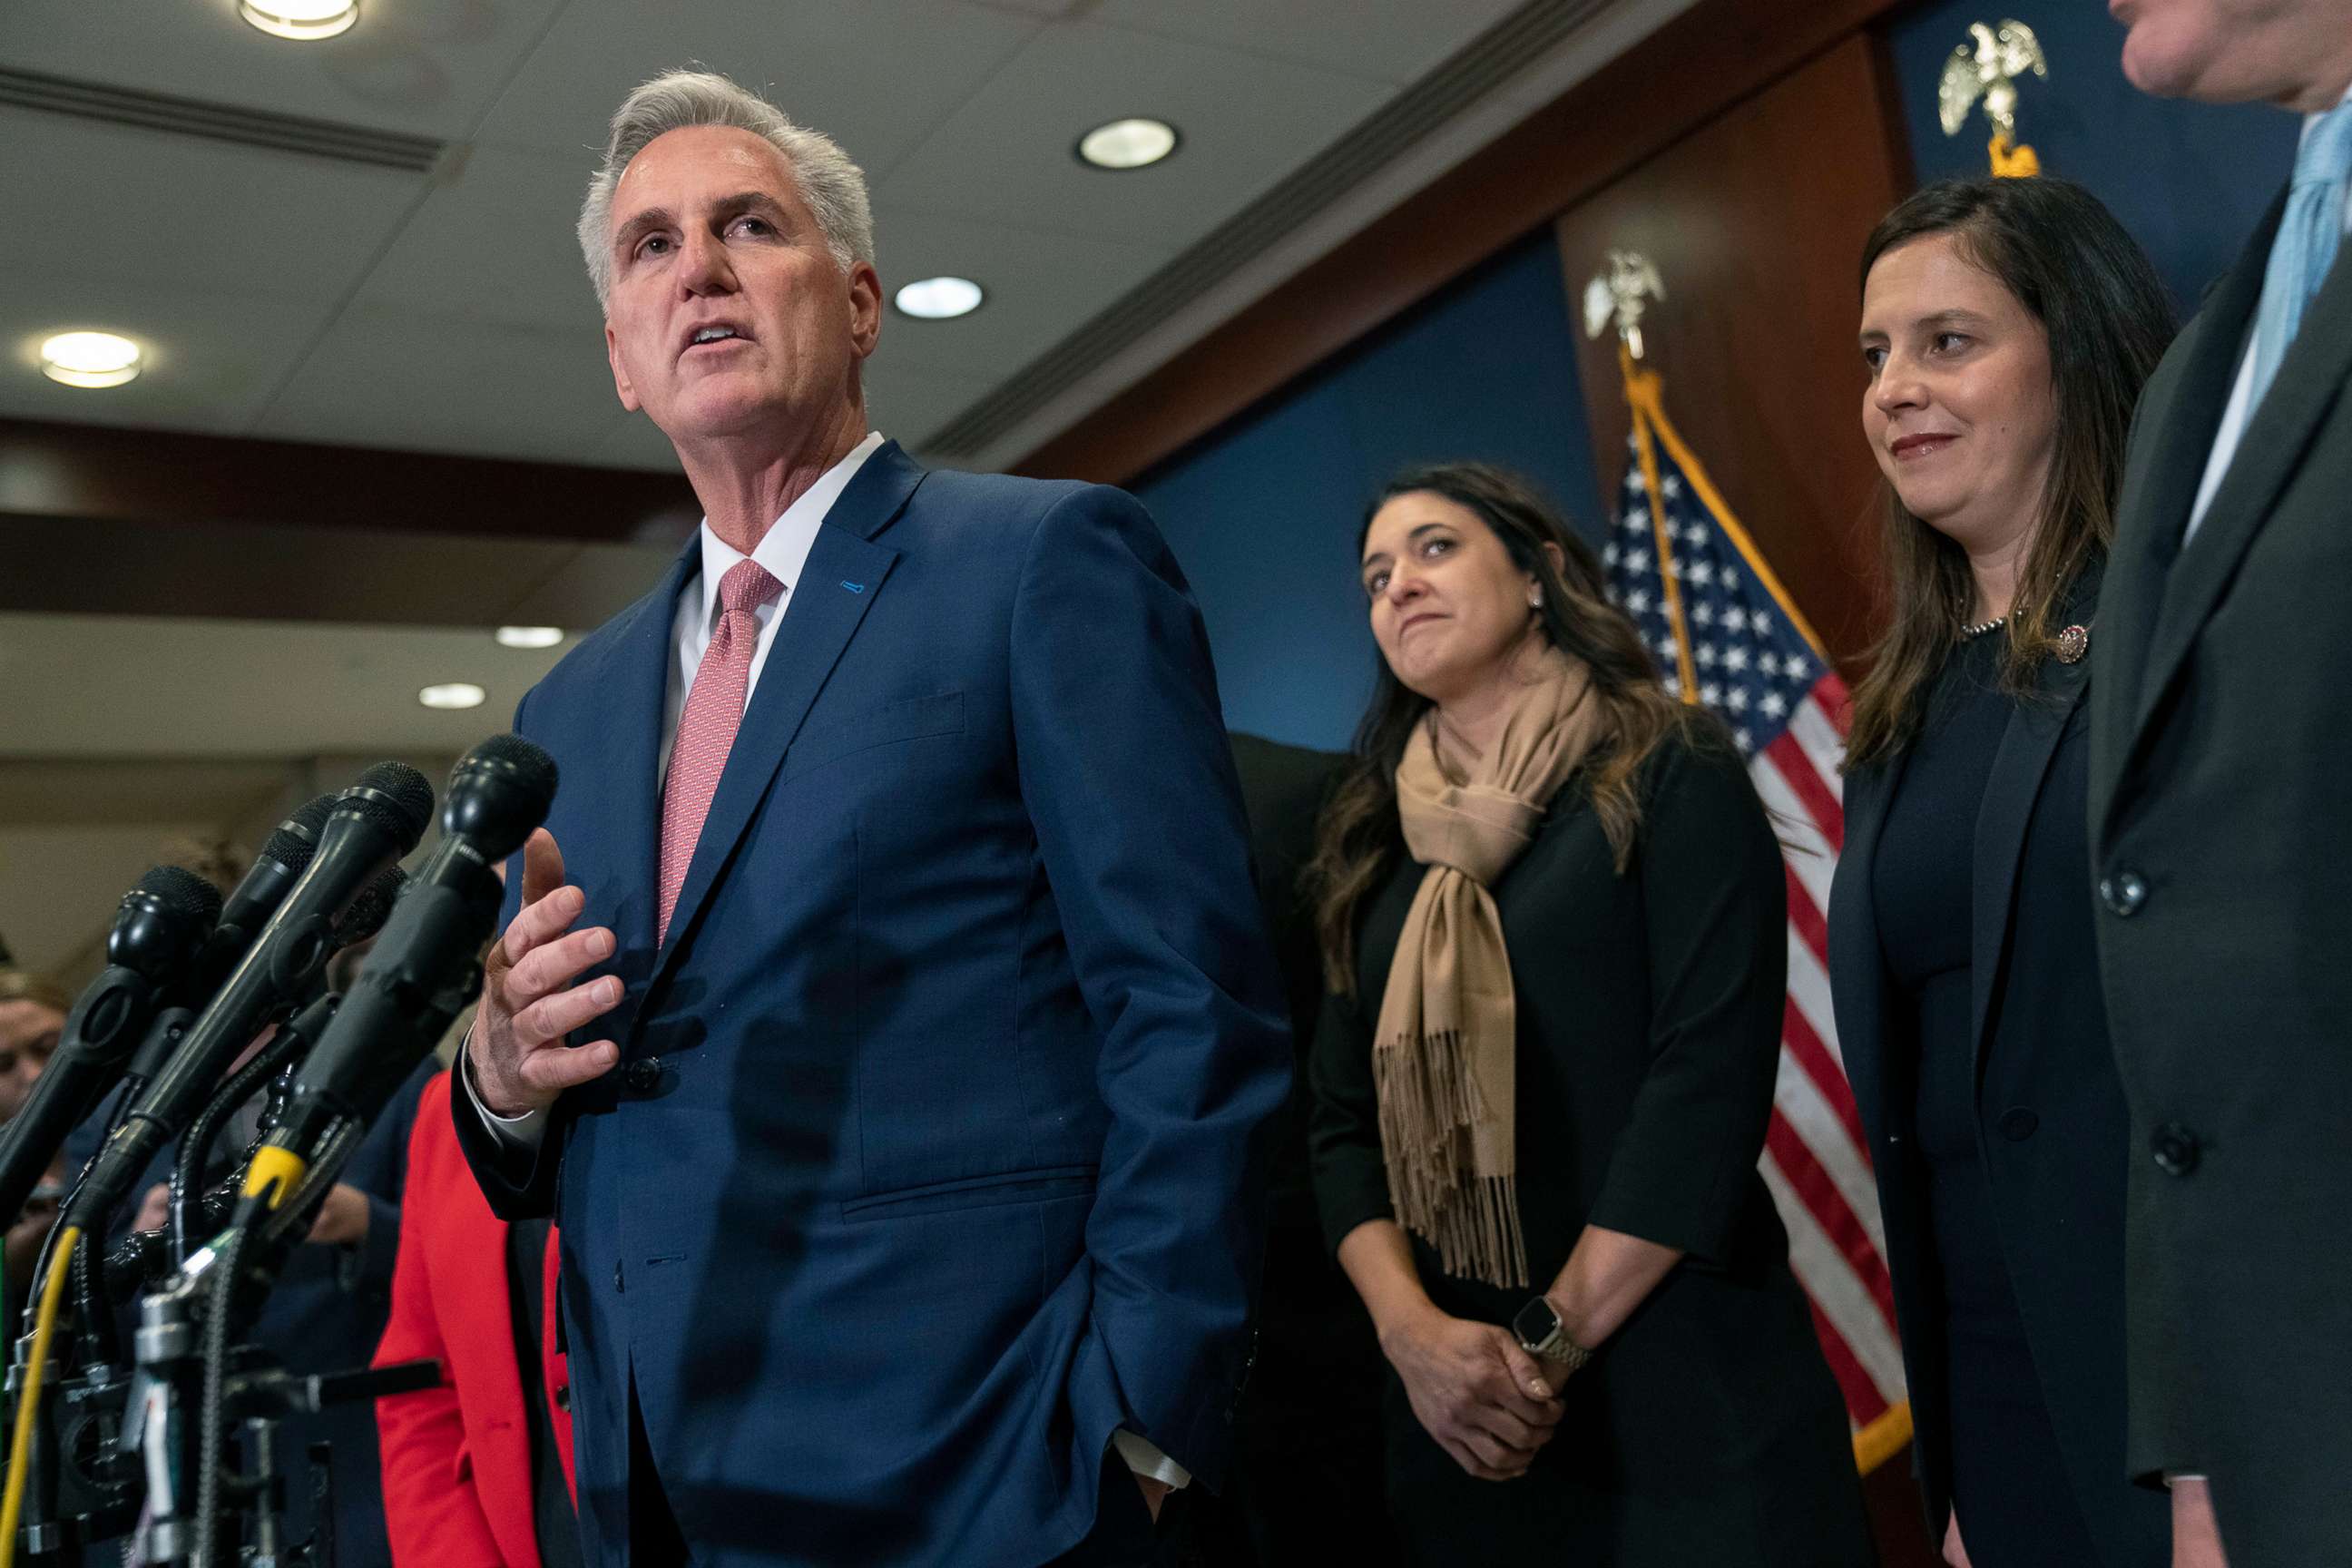 PHOTO: House Minority Leader Kevin McCarthy, left, speaks during a news conference with members of the House Republican leadership, Nov. 15, 2022, after voting on top House Republican leadership positions, on Capitol Hill.